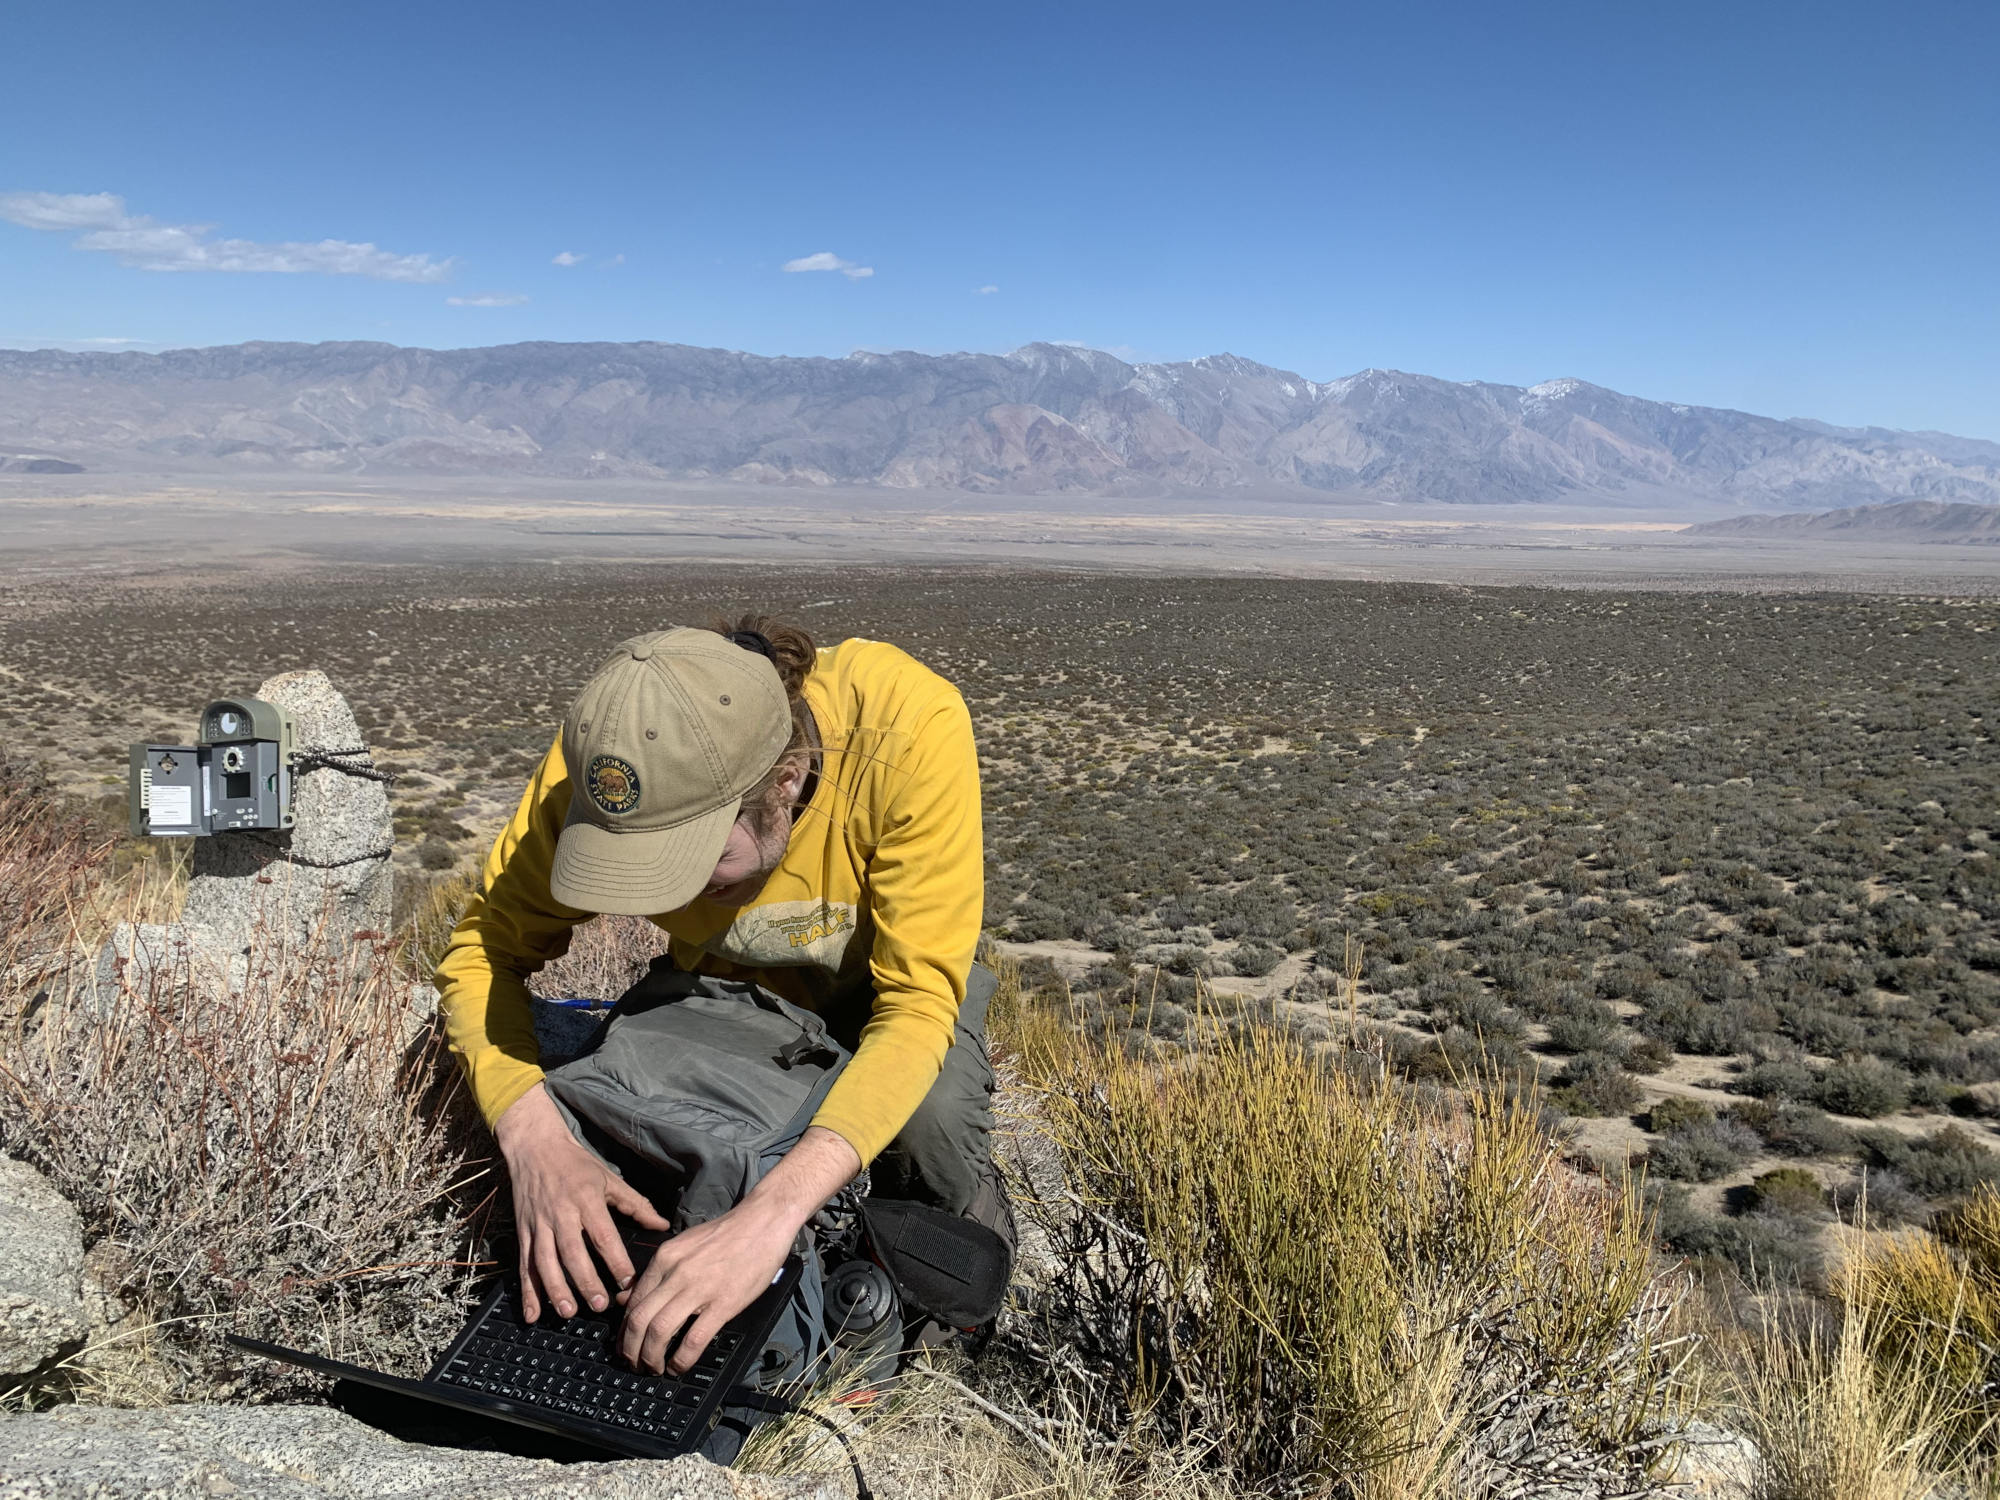 Working on the time-lapse camera network in the Eastern Sierra.